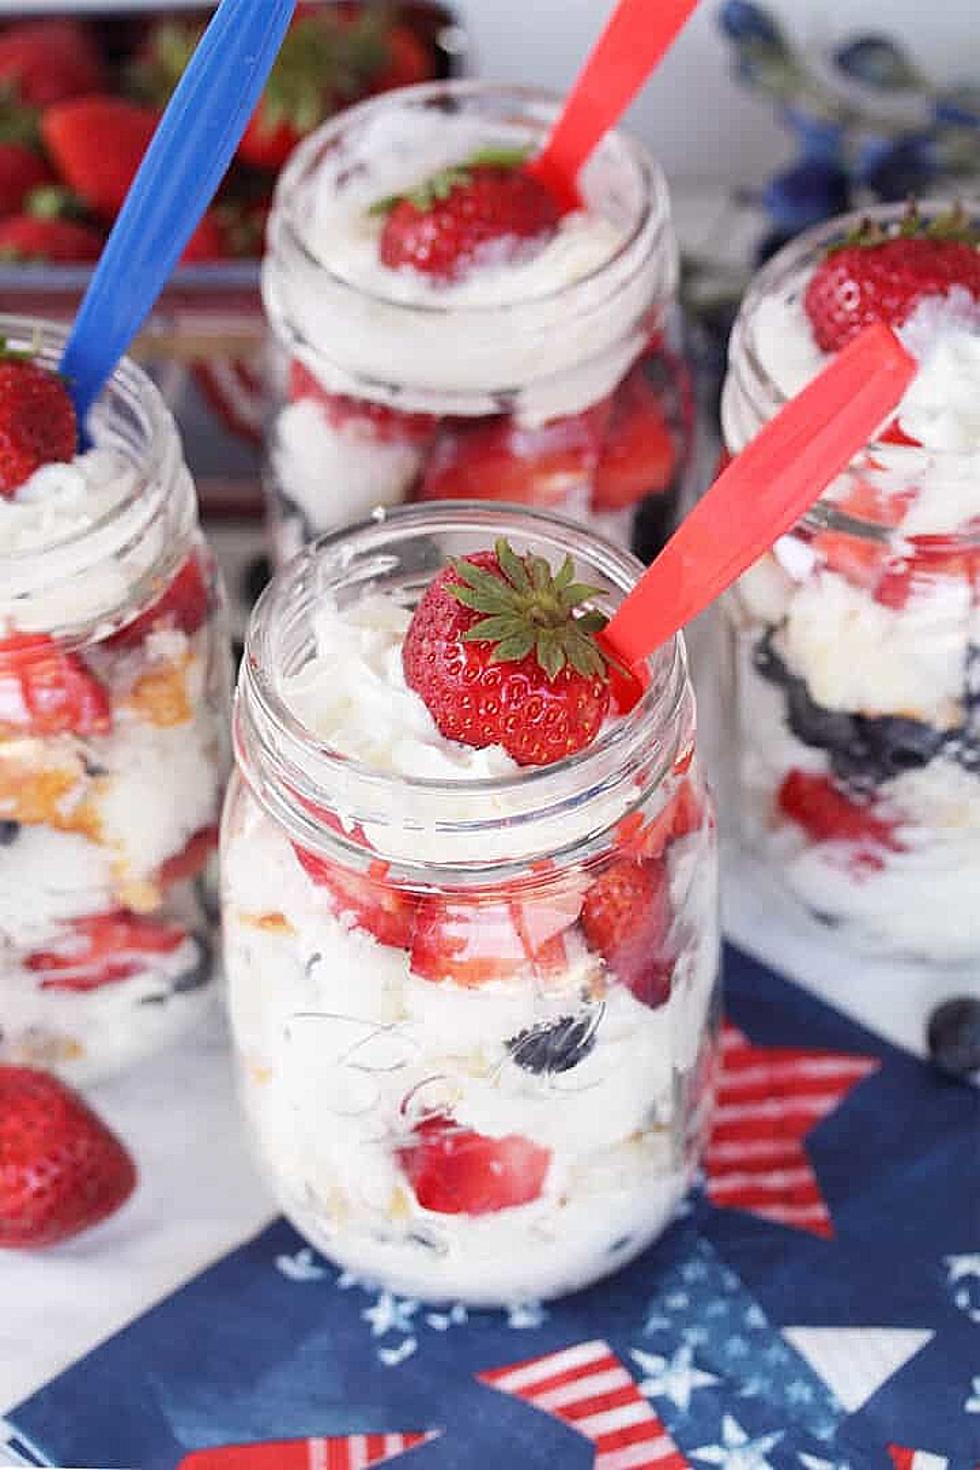 5 Quick &Easy No Bake Dessert Recipes Perfect For Your Labor Day BBQ